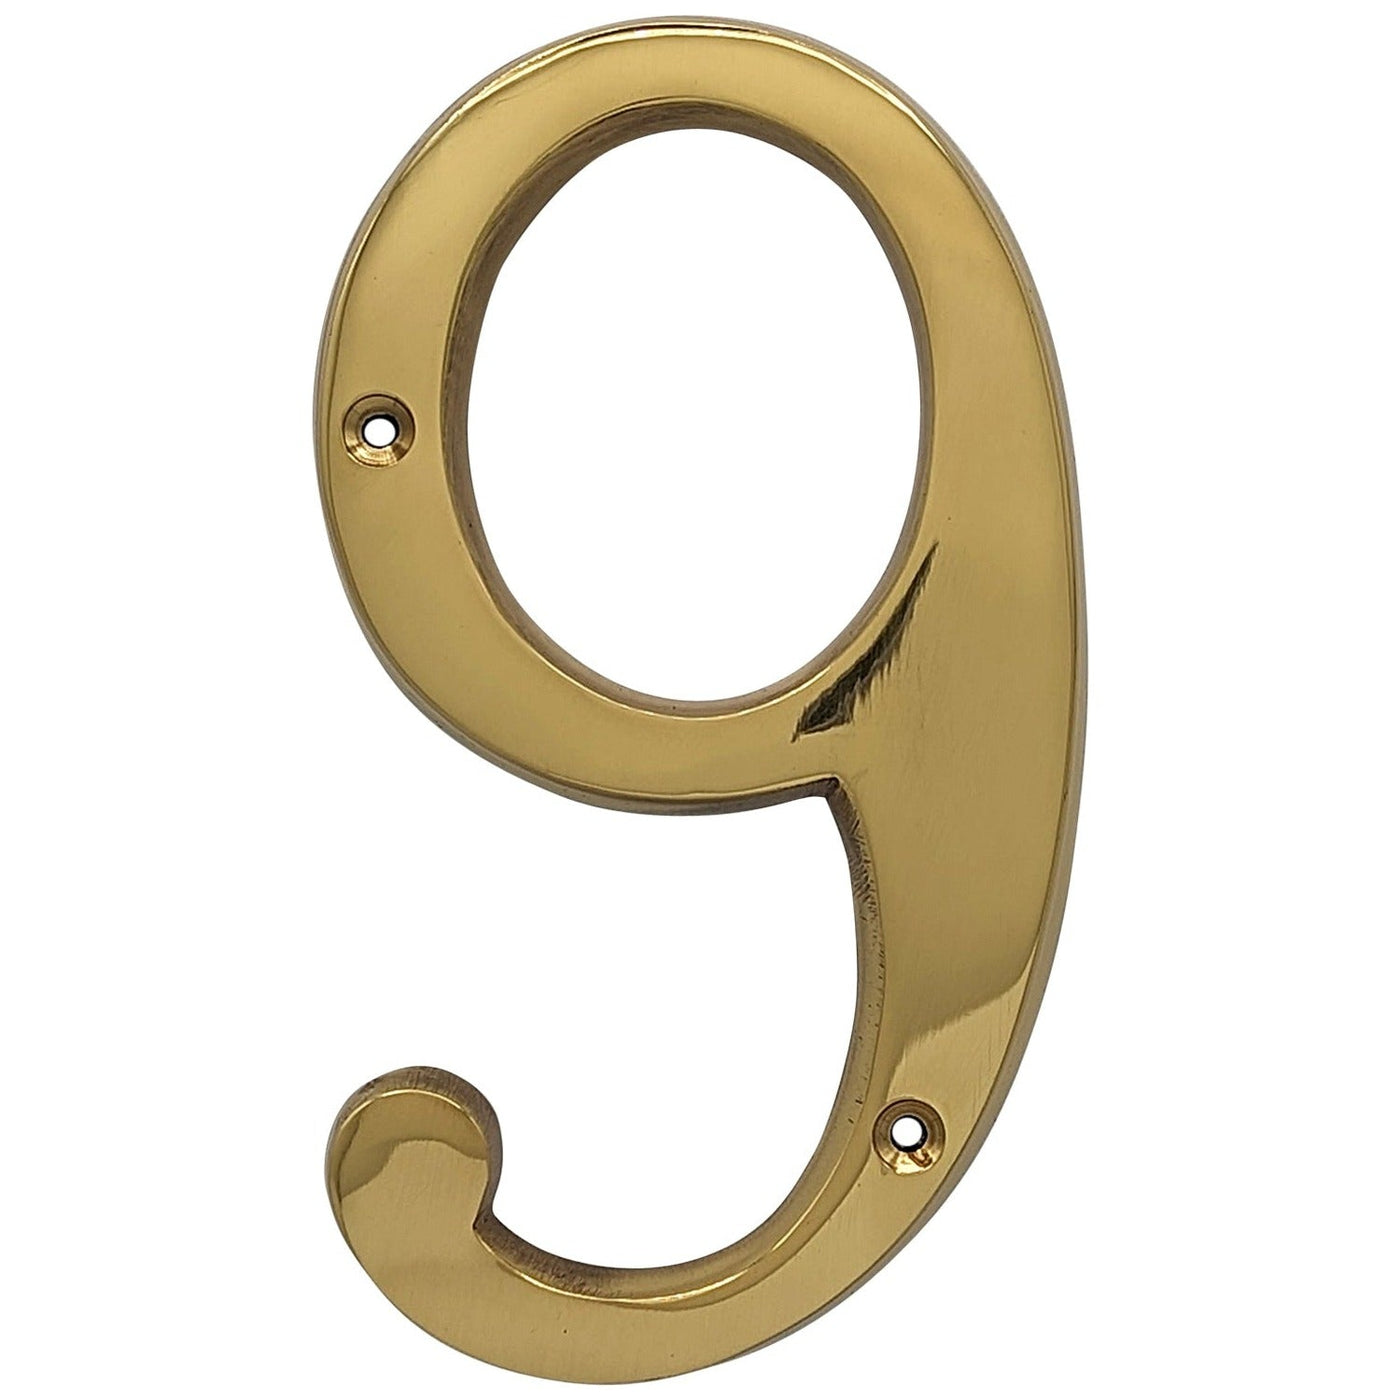 6 Inch Tall House Number 6 or 9